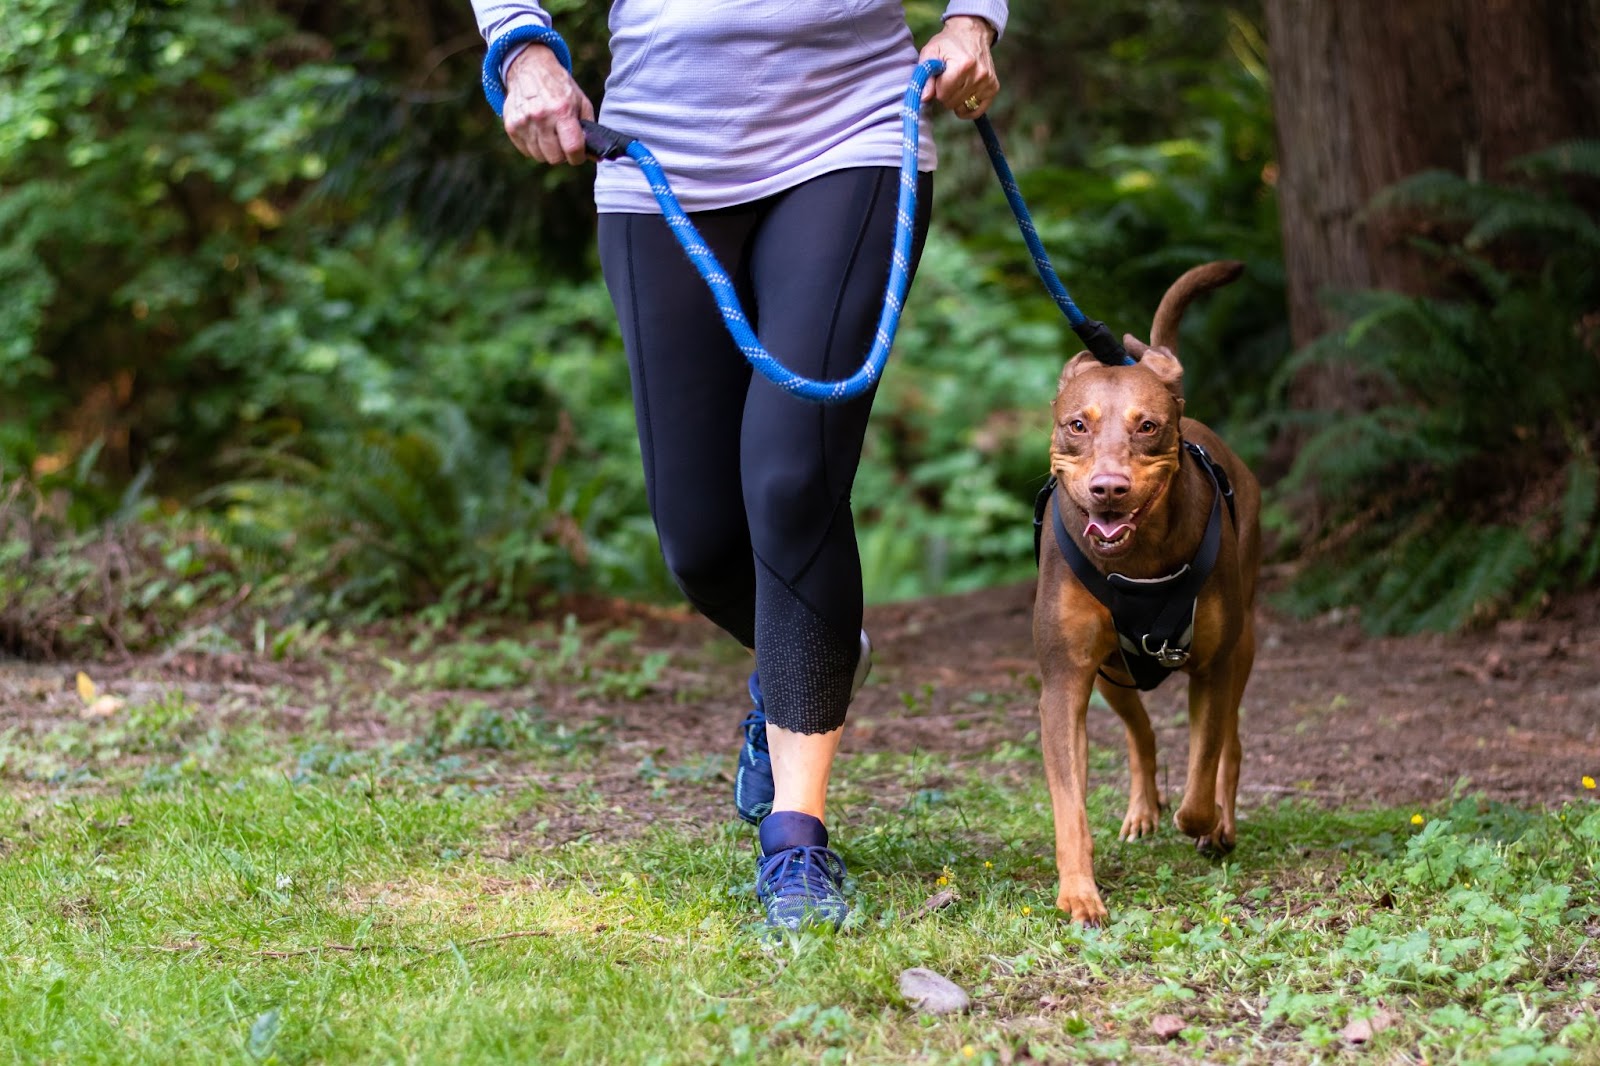 Owner running on a trail with a leashed dog